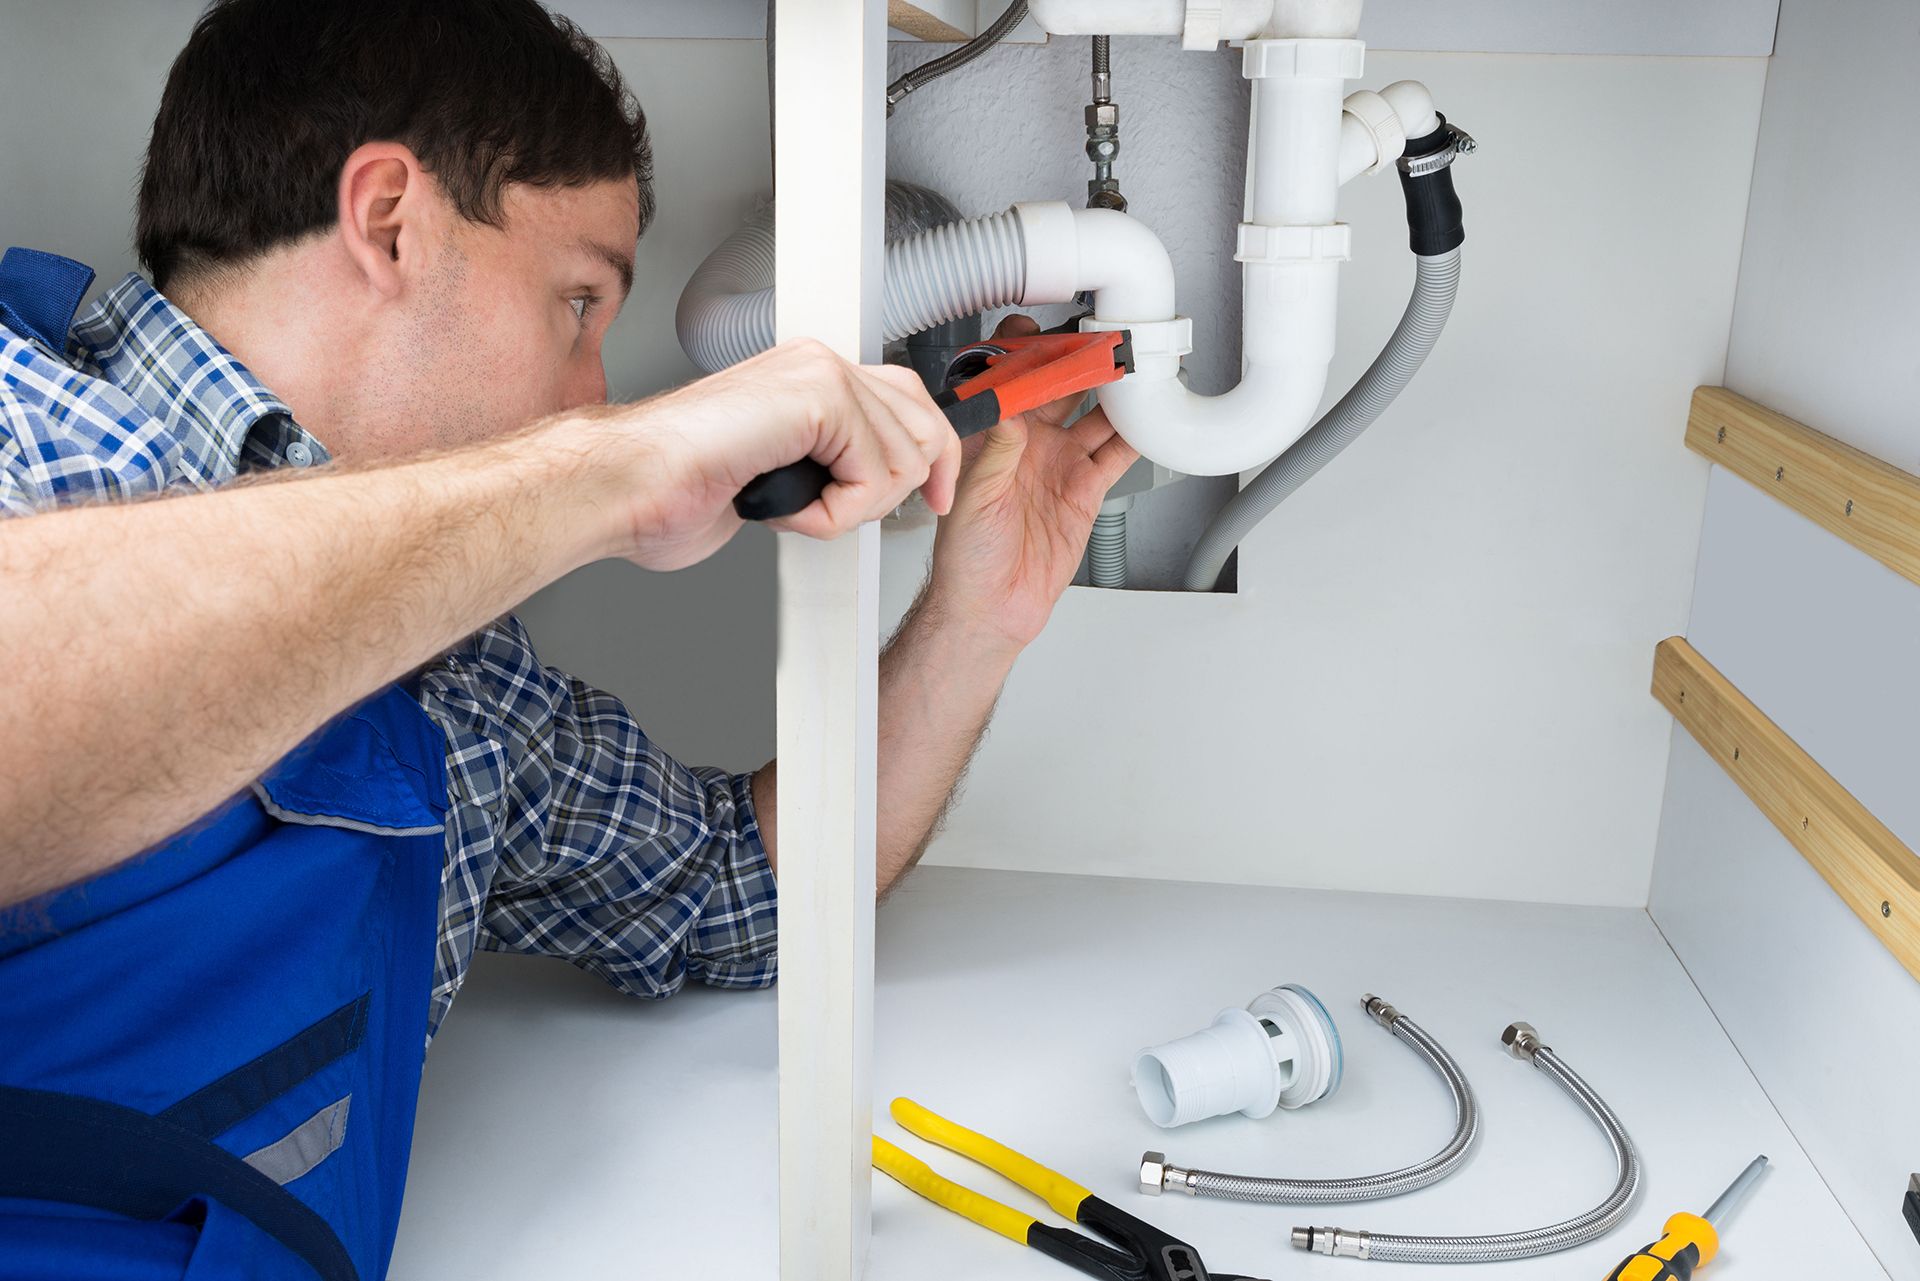 Male plumber fixing a sink